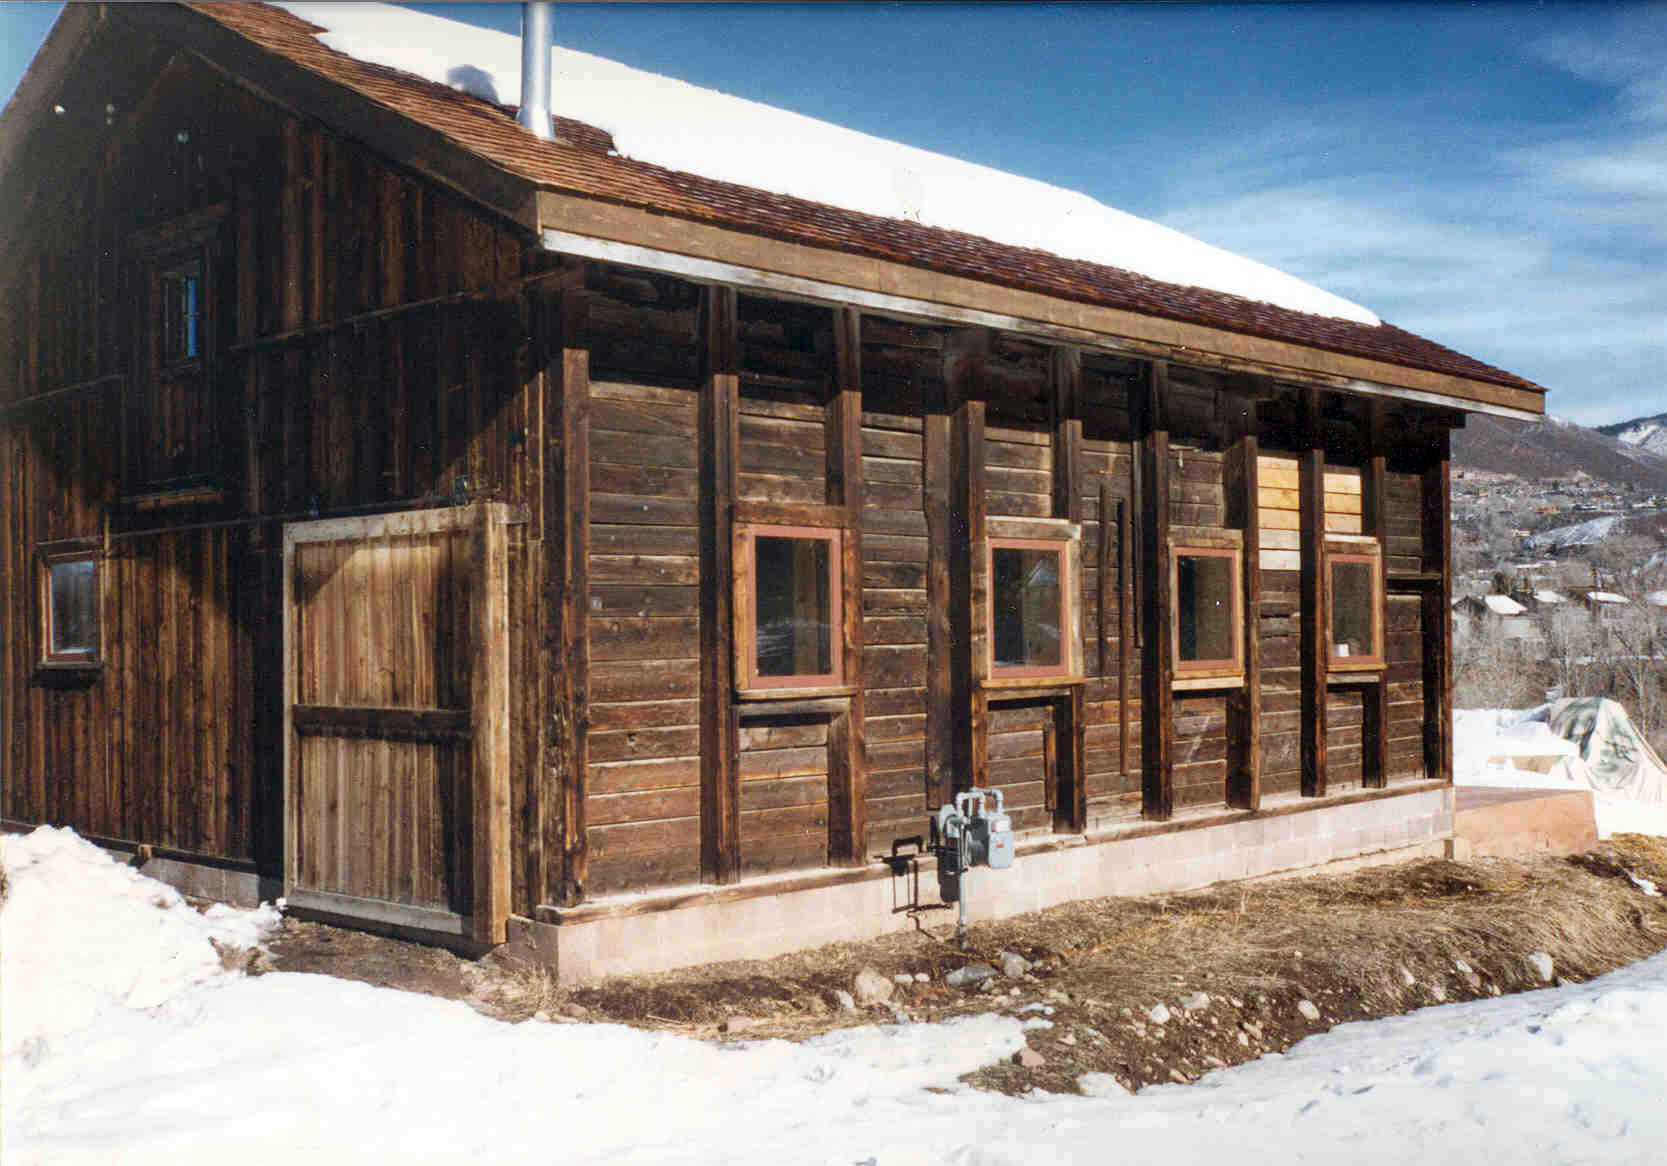 A building at the Holden Mining & Smelting Co. on a snowy day, 2000.